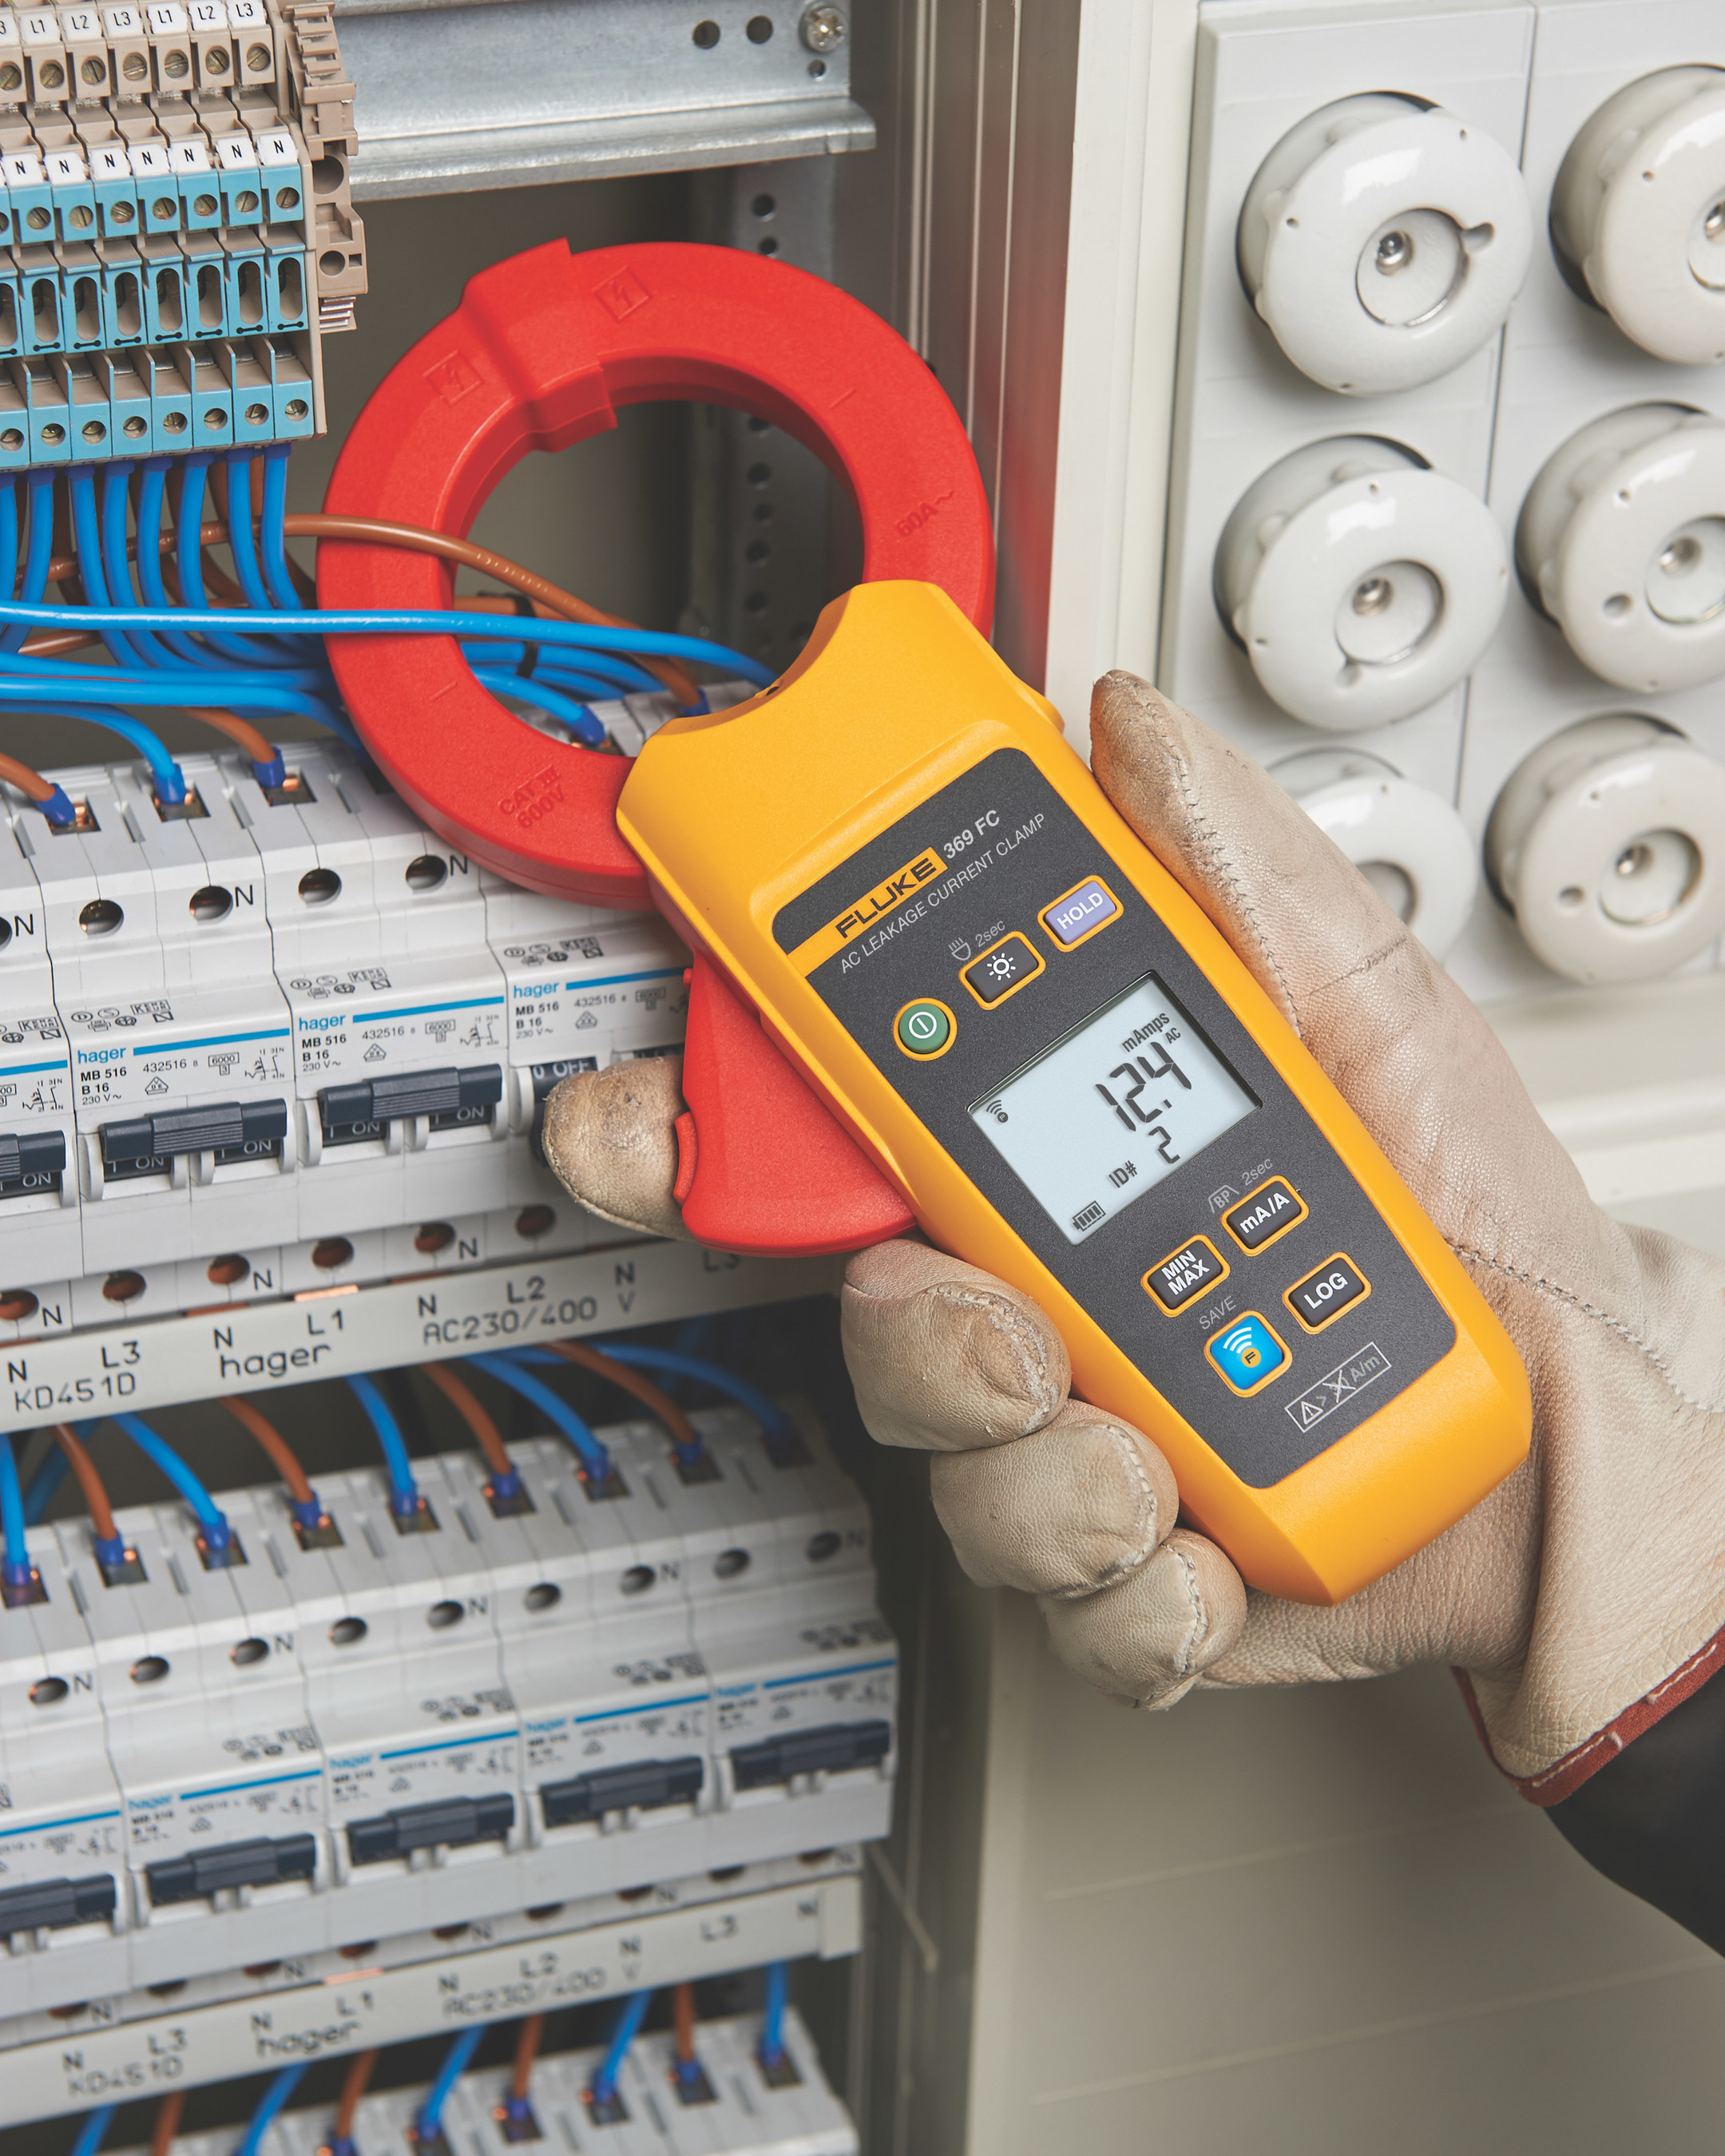 The new Fluke 368 FC and 369 FC Leakage Current Clamps help industrial electricians and maintenance technicians identify, document, record, and compare leakage current readings over time to help prevent problems before they happen without shutting down critical equipment.